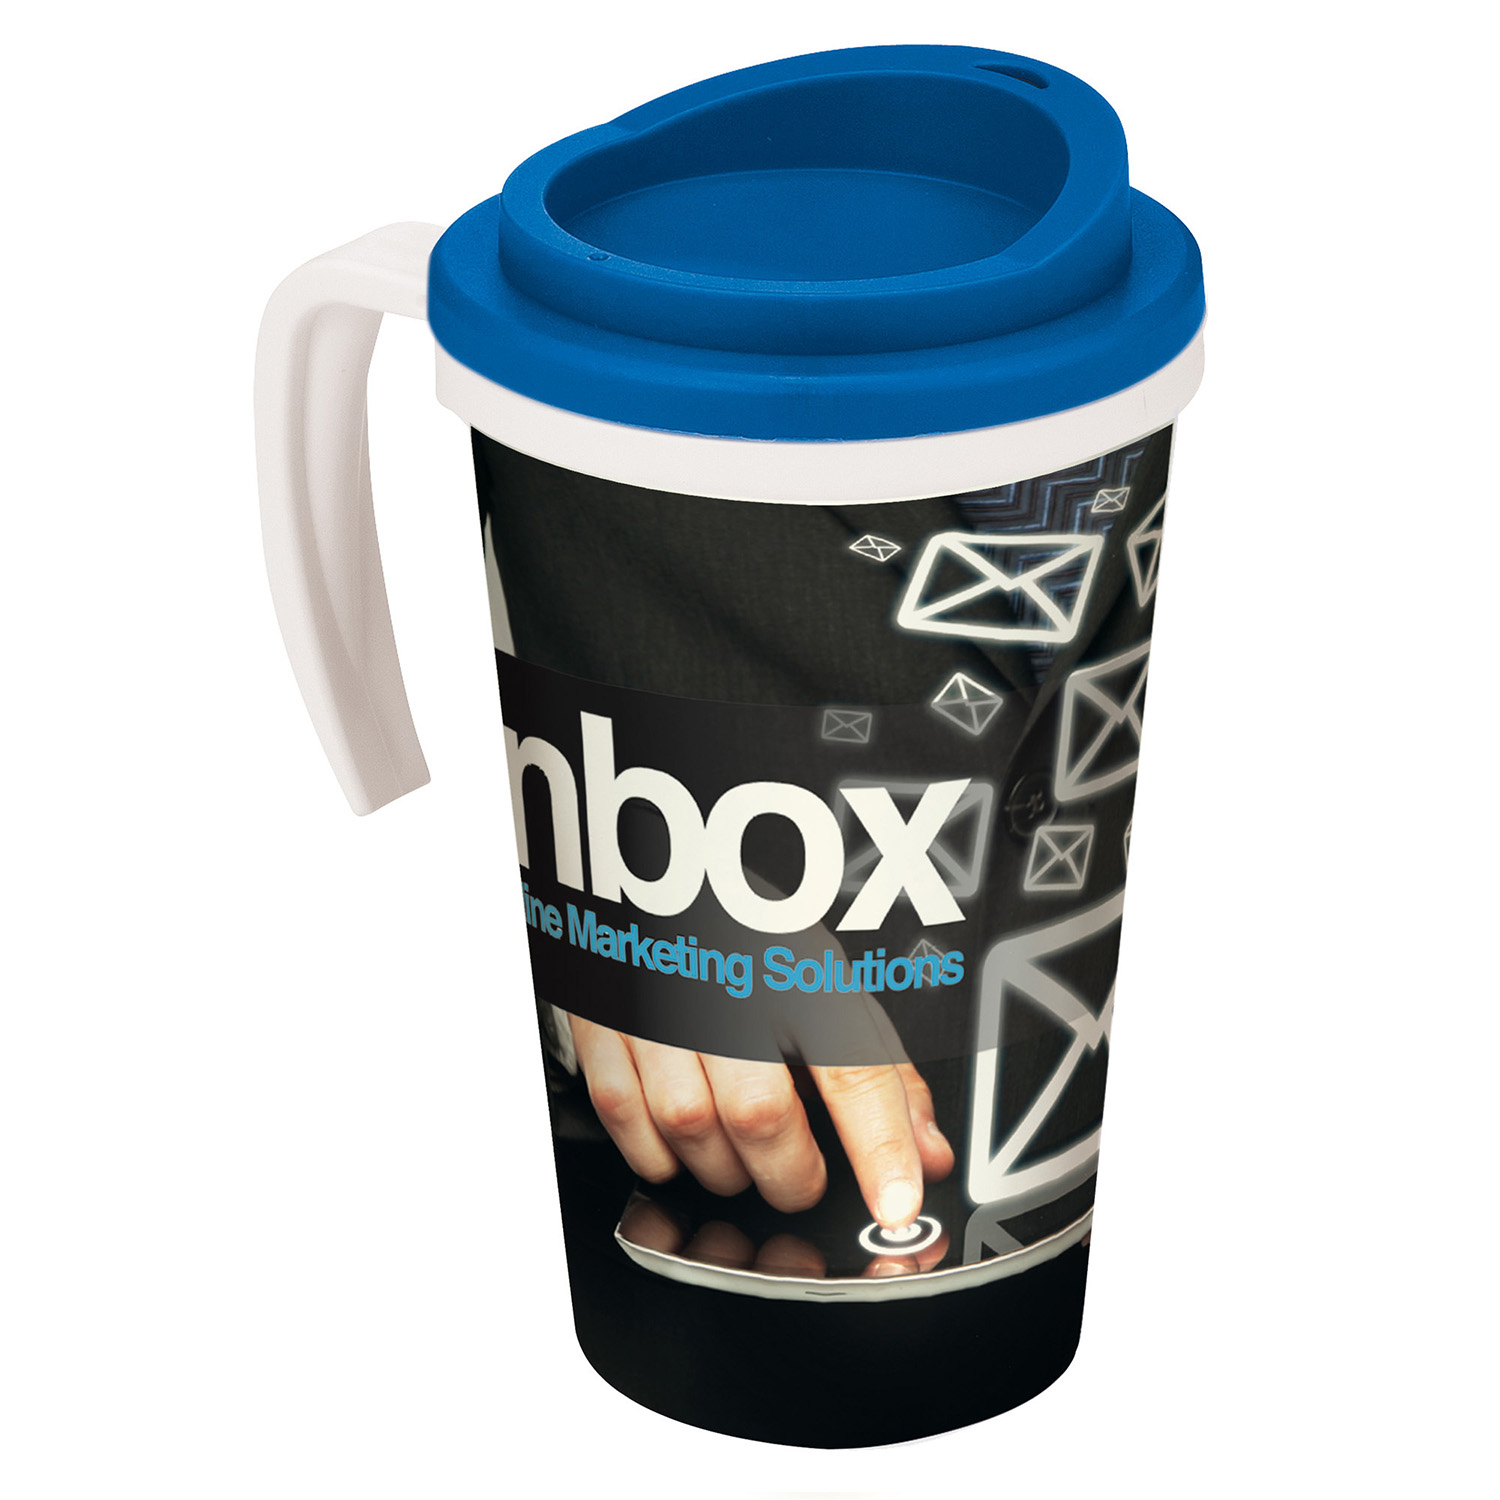 Grande Thermal Mug showing full colour print with blue lid